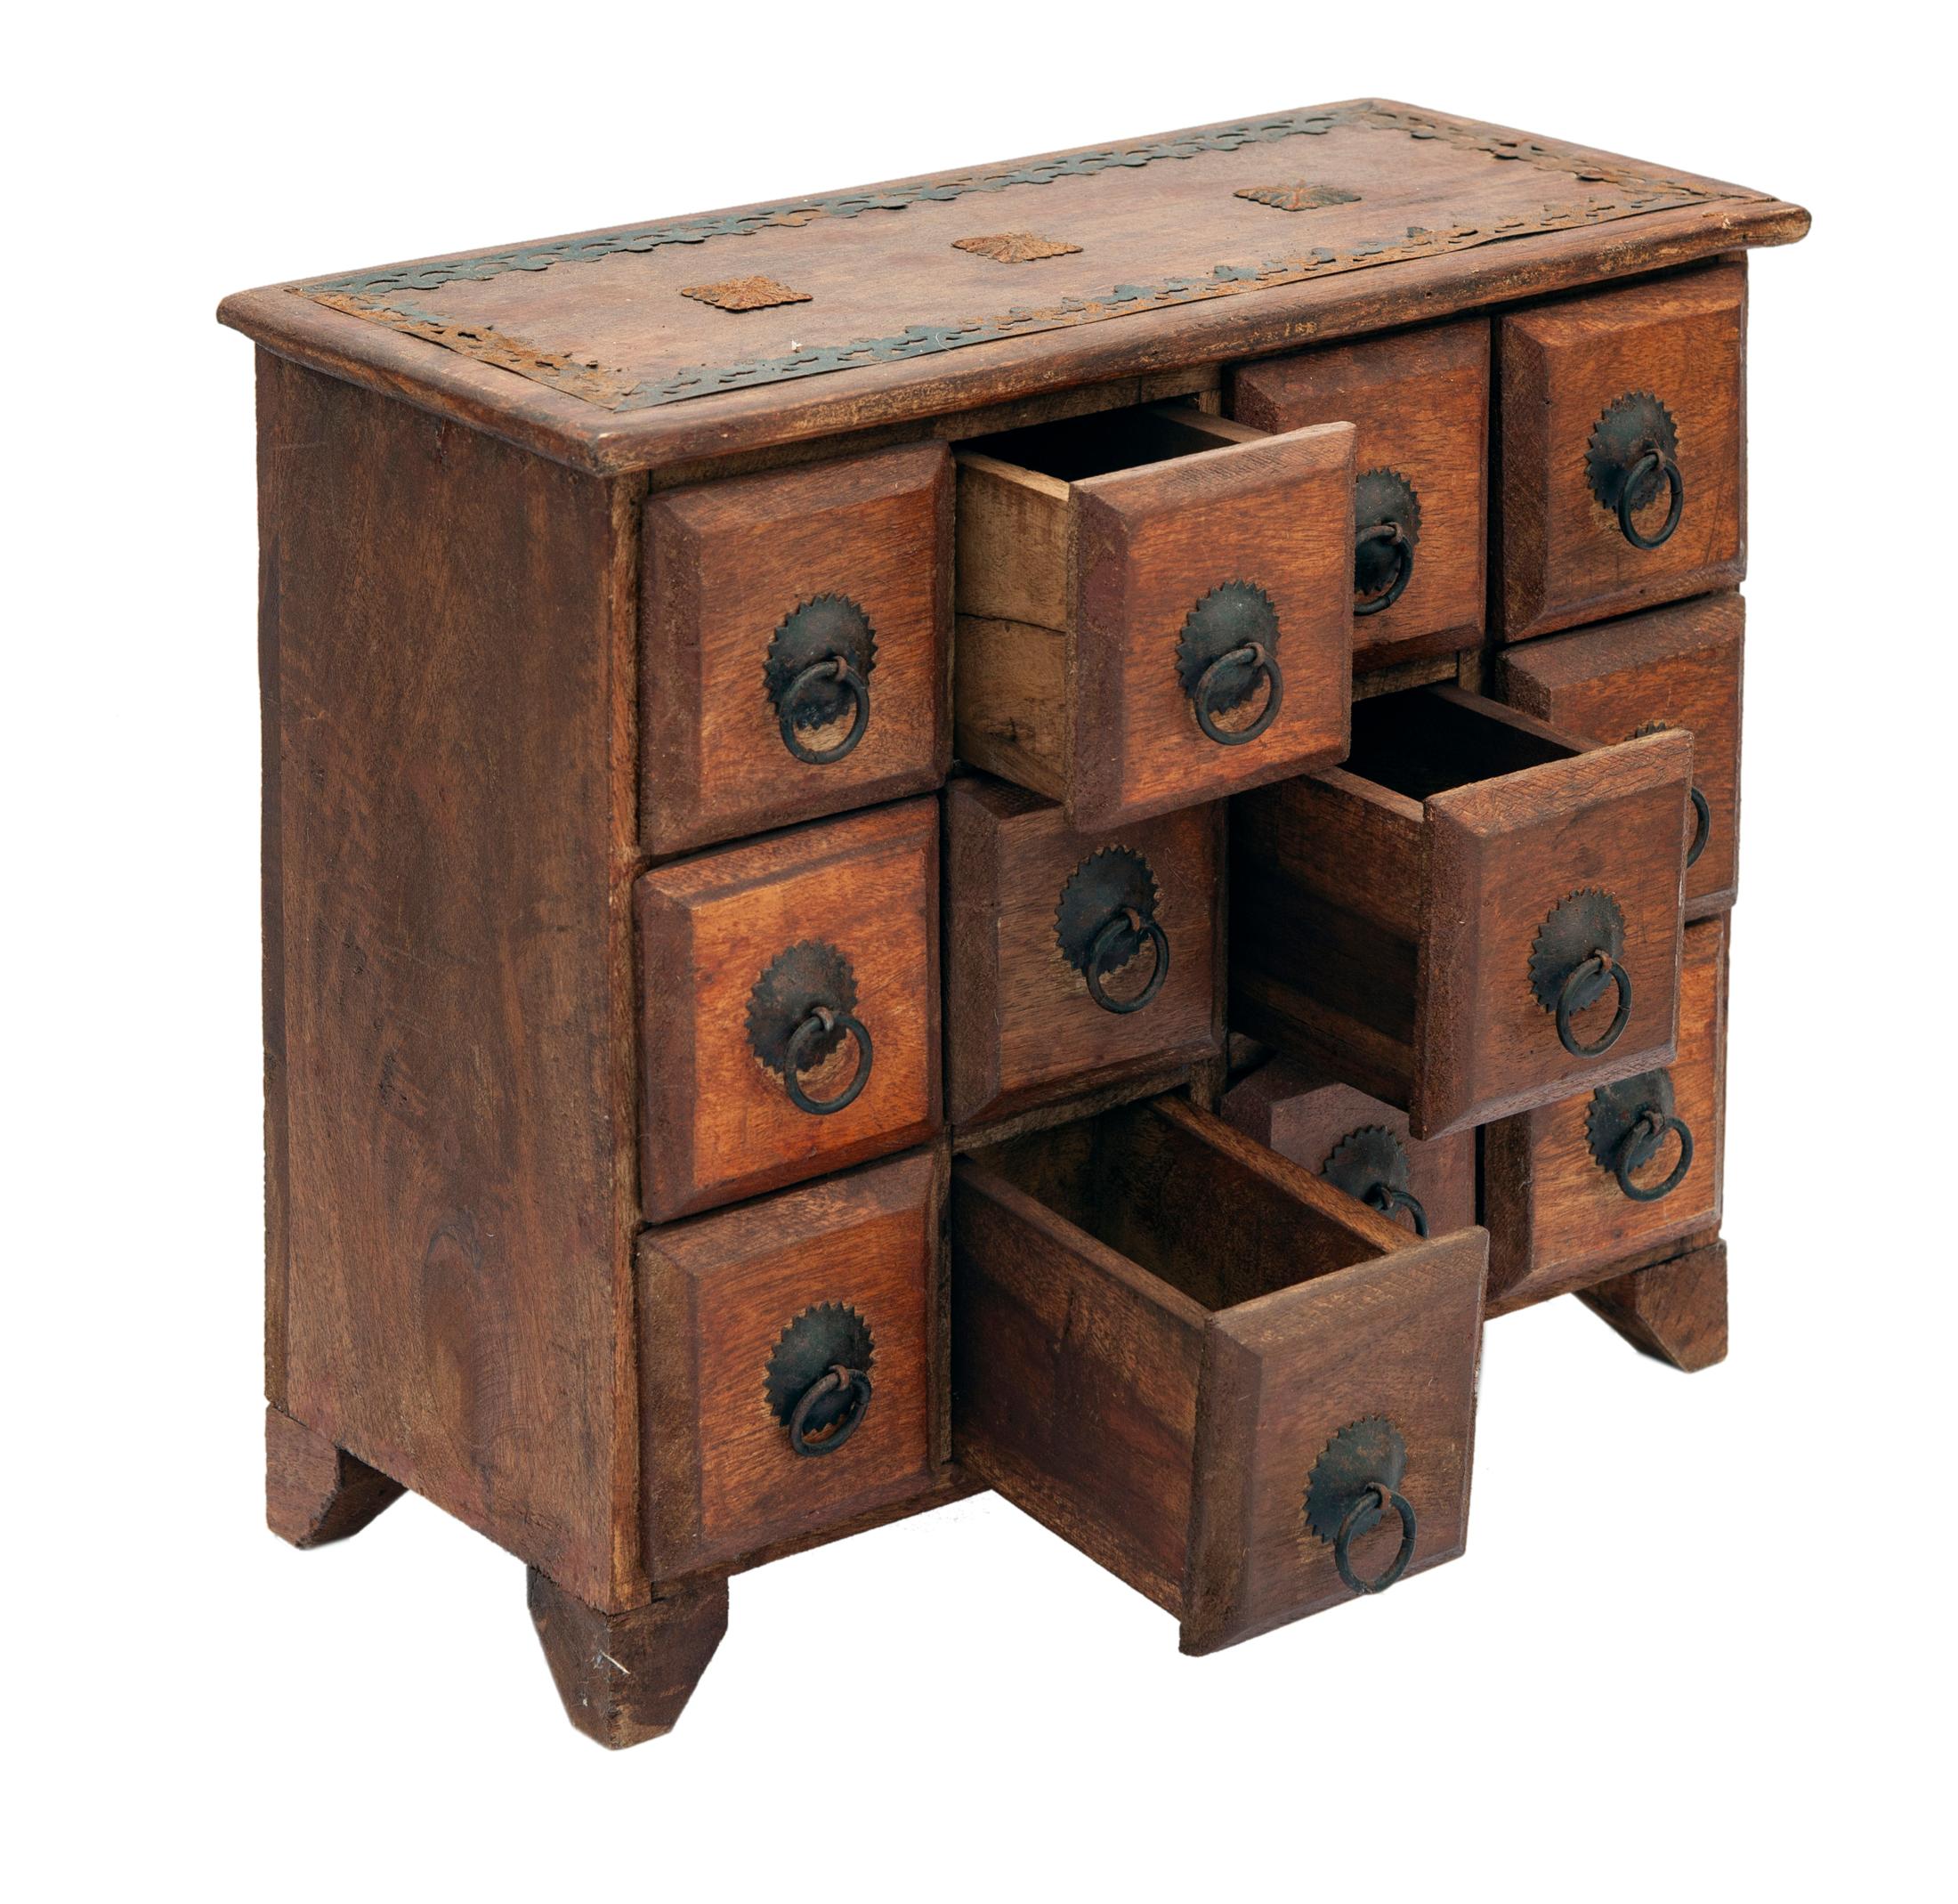 Rustic Handcrafted Indonesian Apothecary Chest